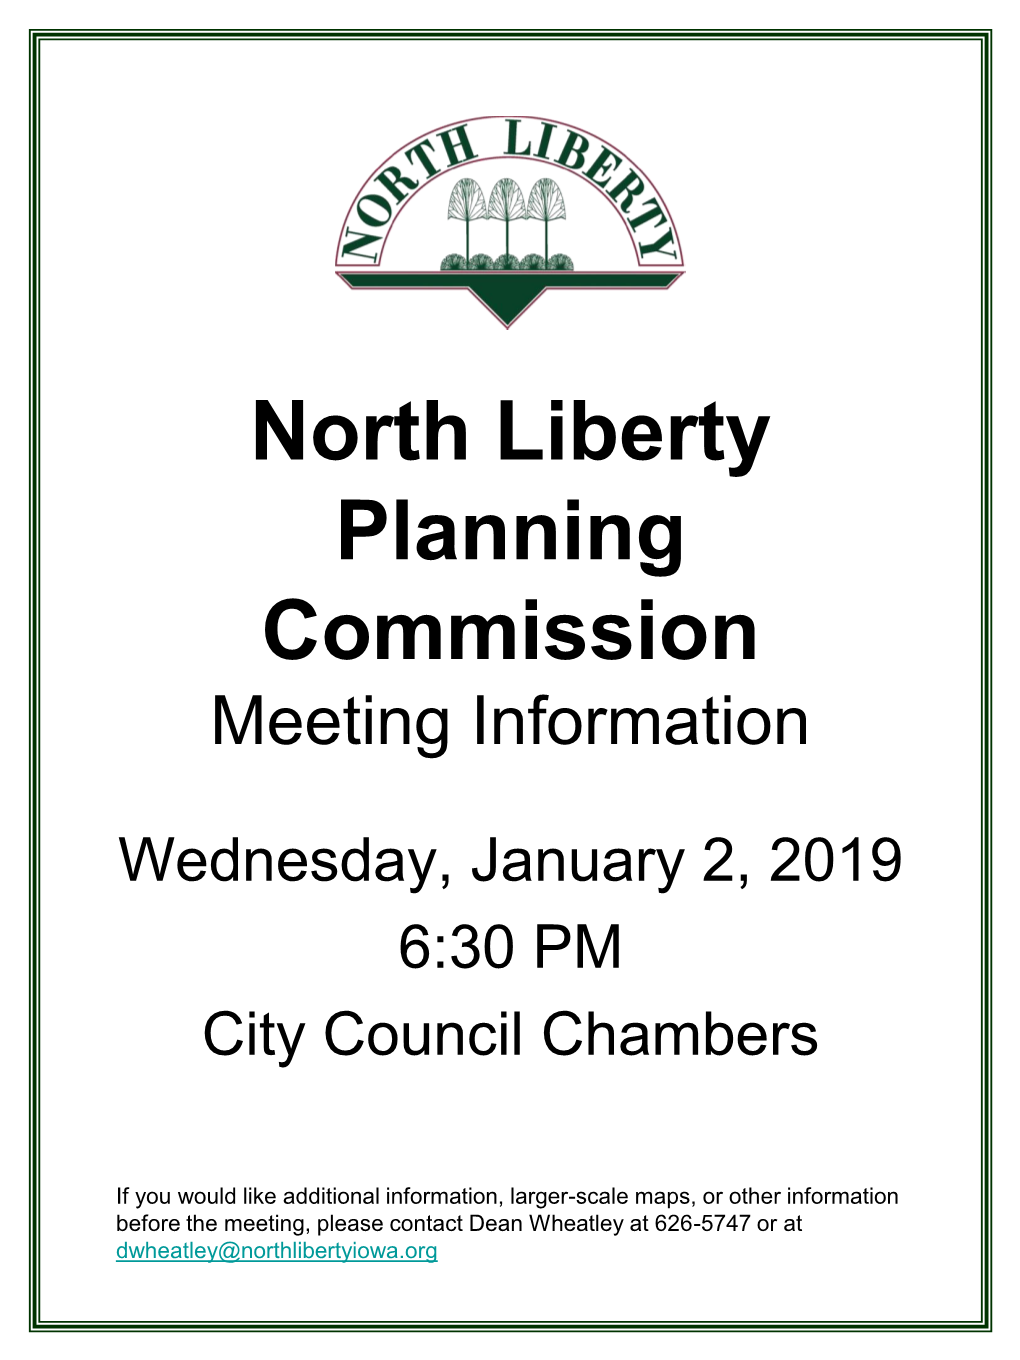 North Liberty Planning Commission Information